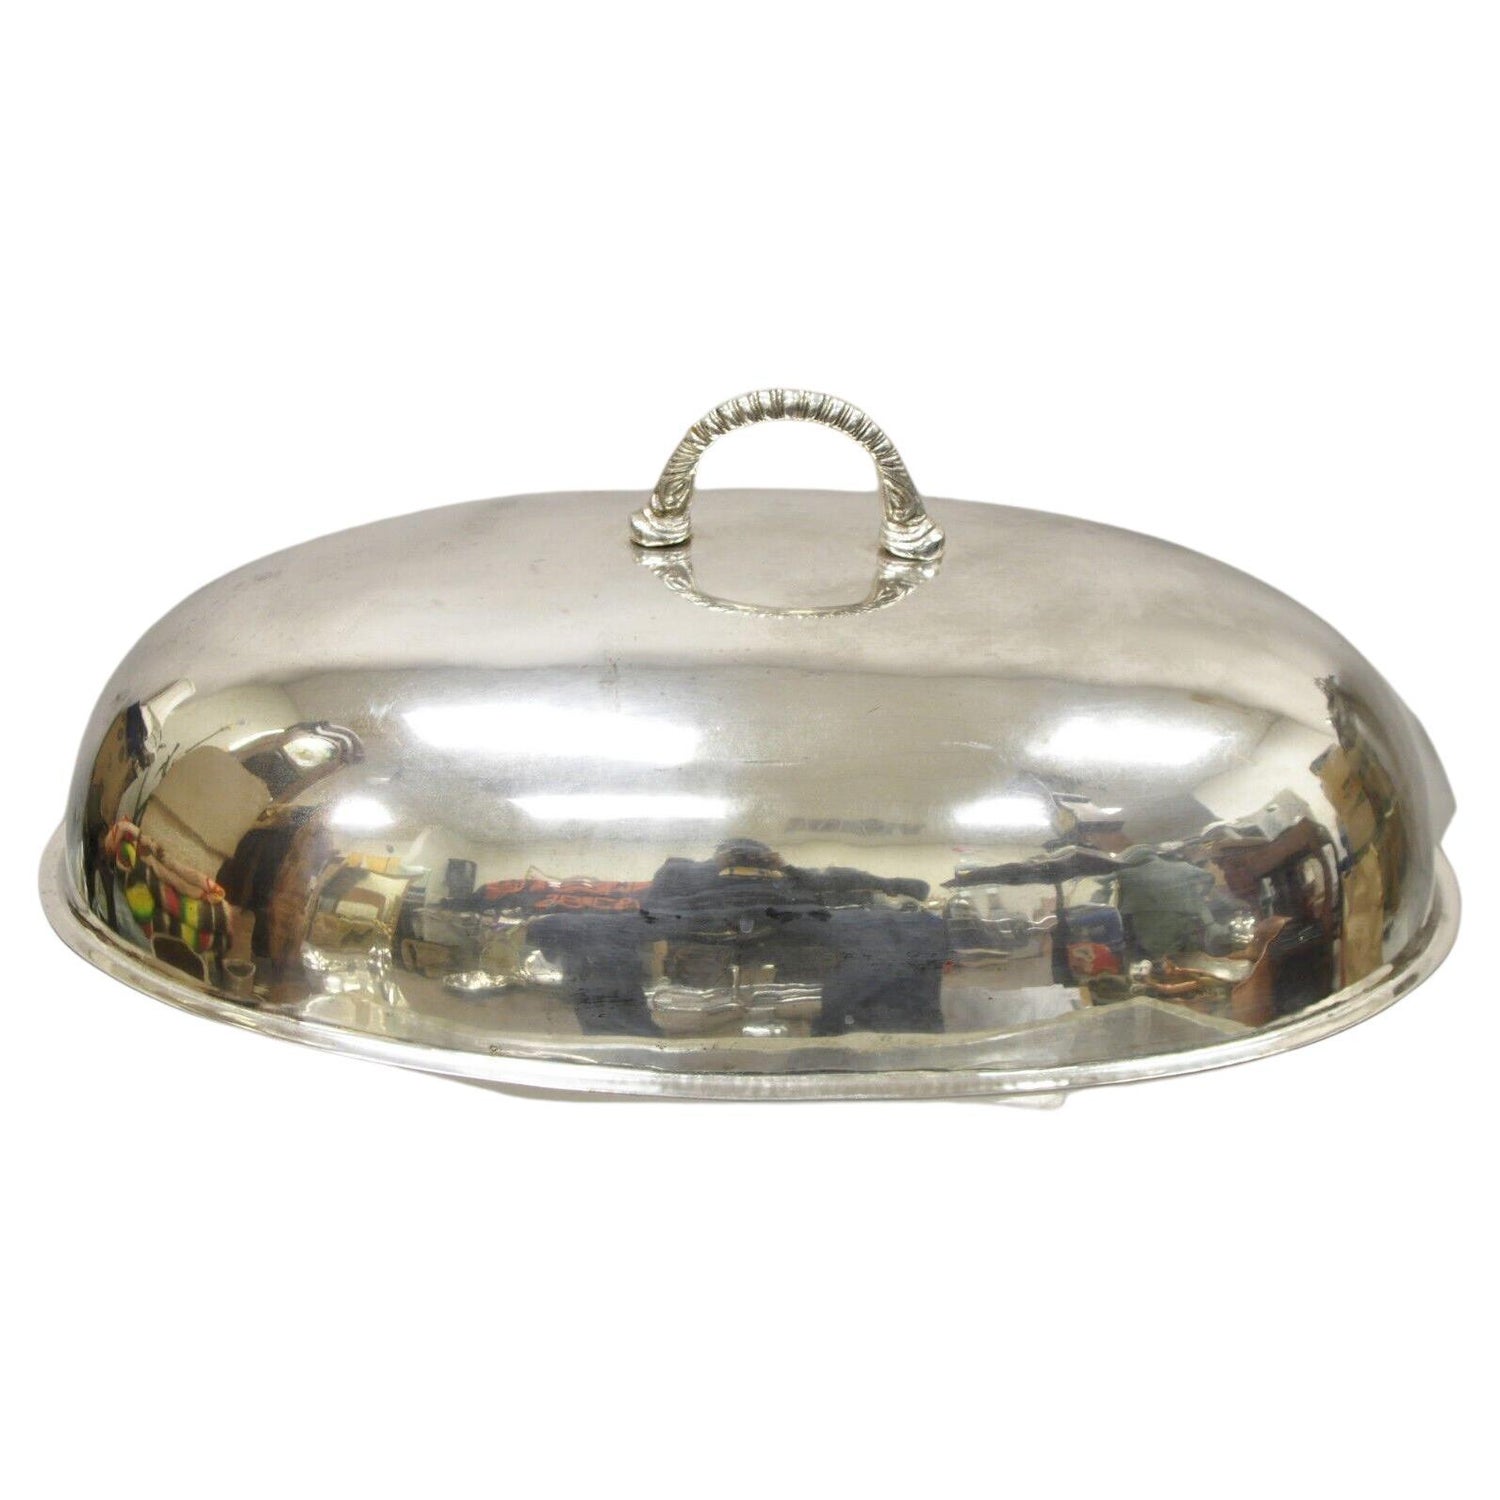 https://a.1stdibscdn.com/large-vintage-oval-modern-22-silver-plated-food-serving-dish-dome-cover-for-sale/f_9341/f_341485921683306226840/f_34148592_1683306227311_bg_processed.jpg?width=1500